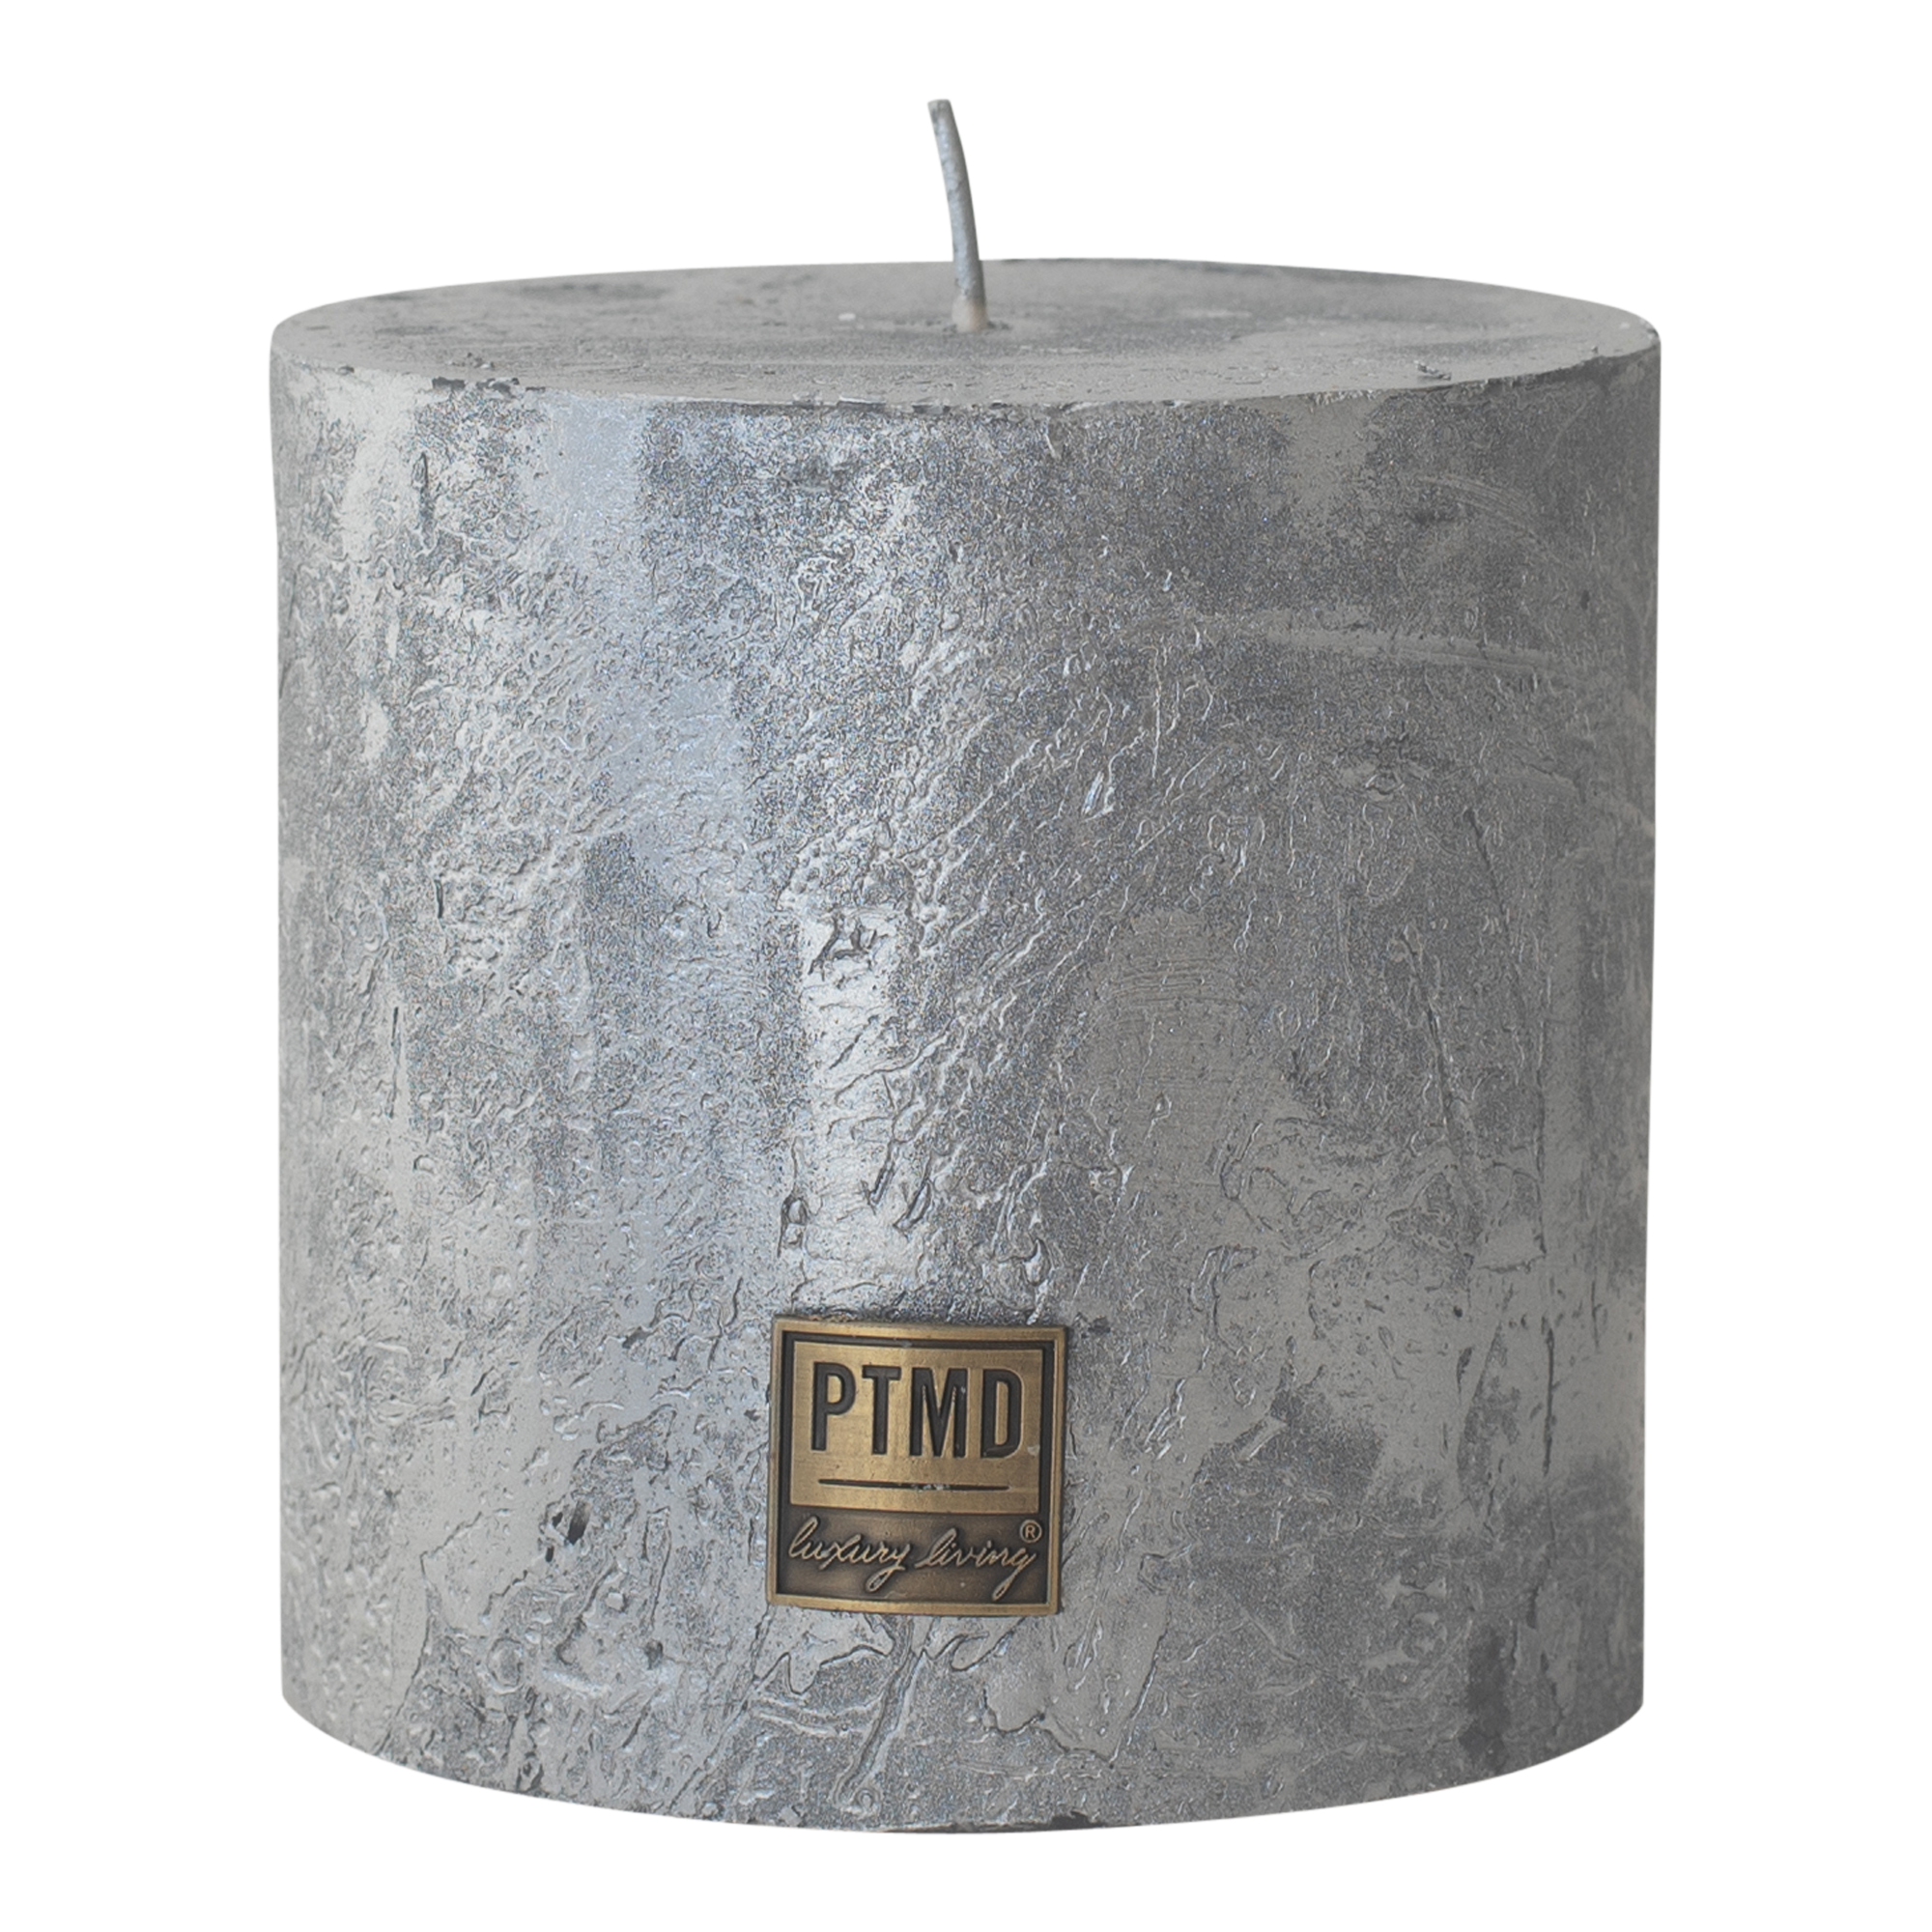 PTMD 10 x 10cm Metallic Silver Wax PTMD Block Candle